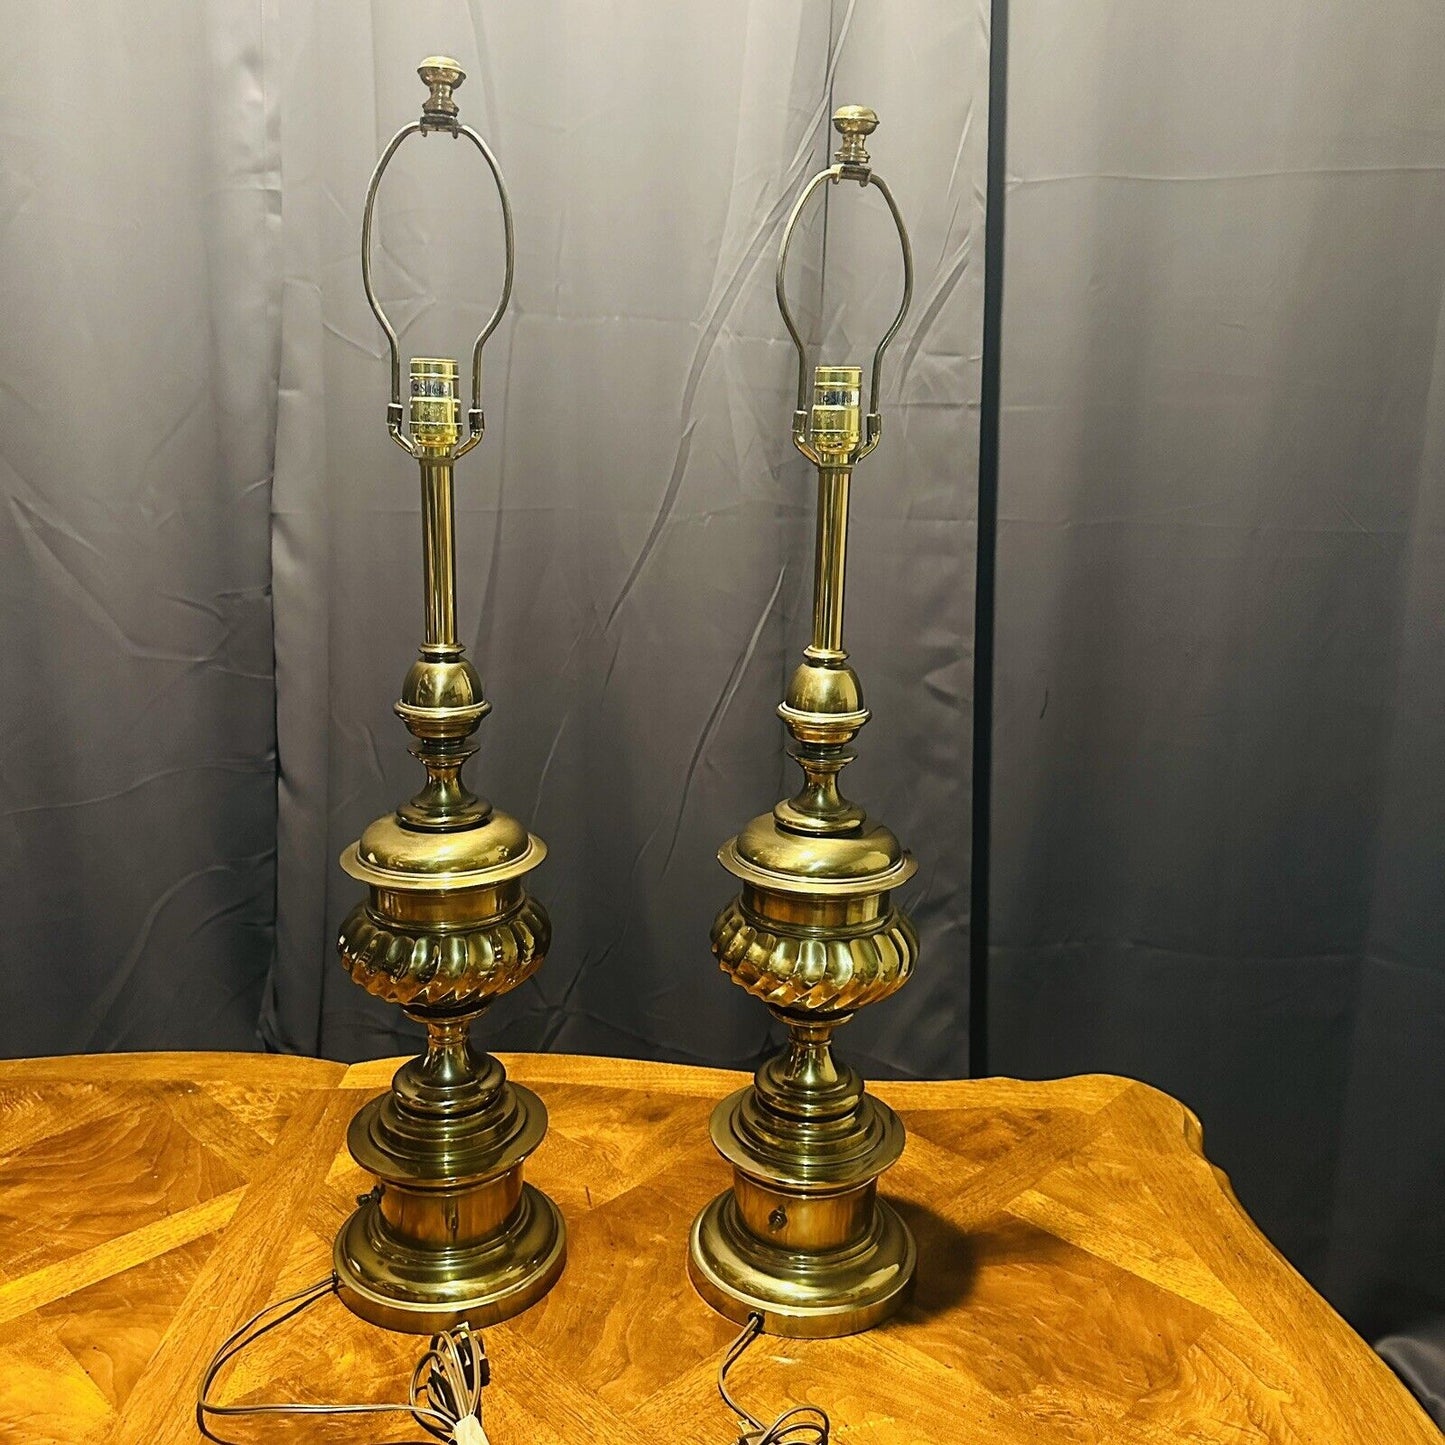 Hollywood Regency Stiffel Solid Brass Table Lamp 33” H USA Made Vintage 2 Pieces